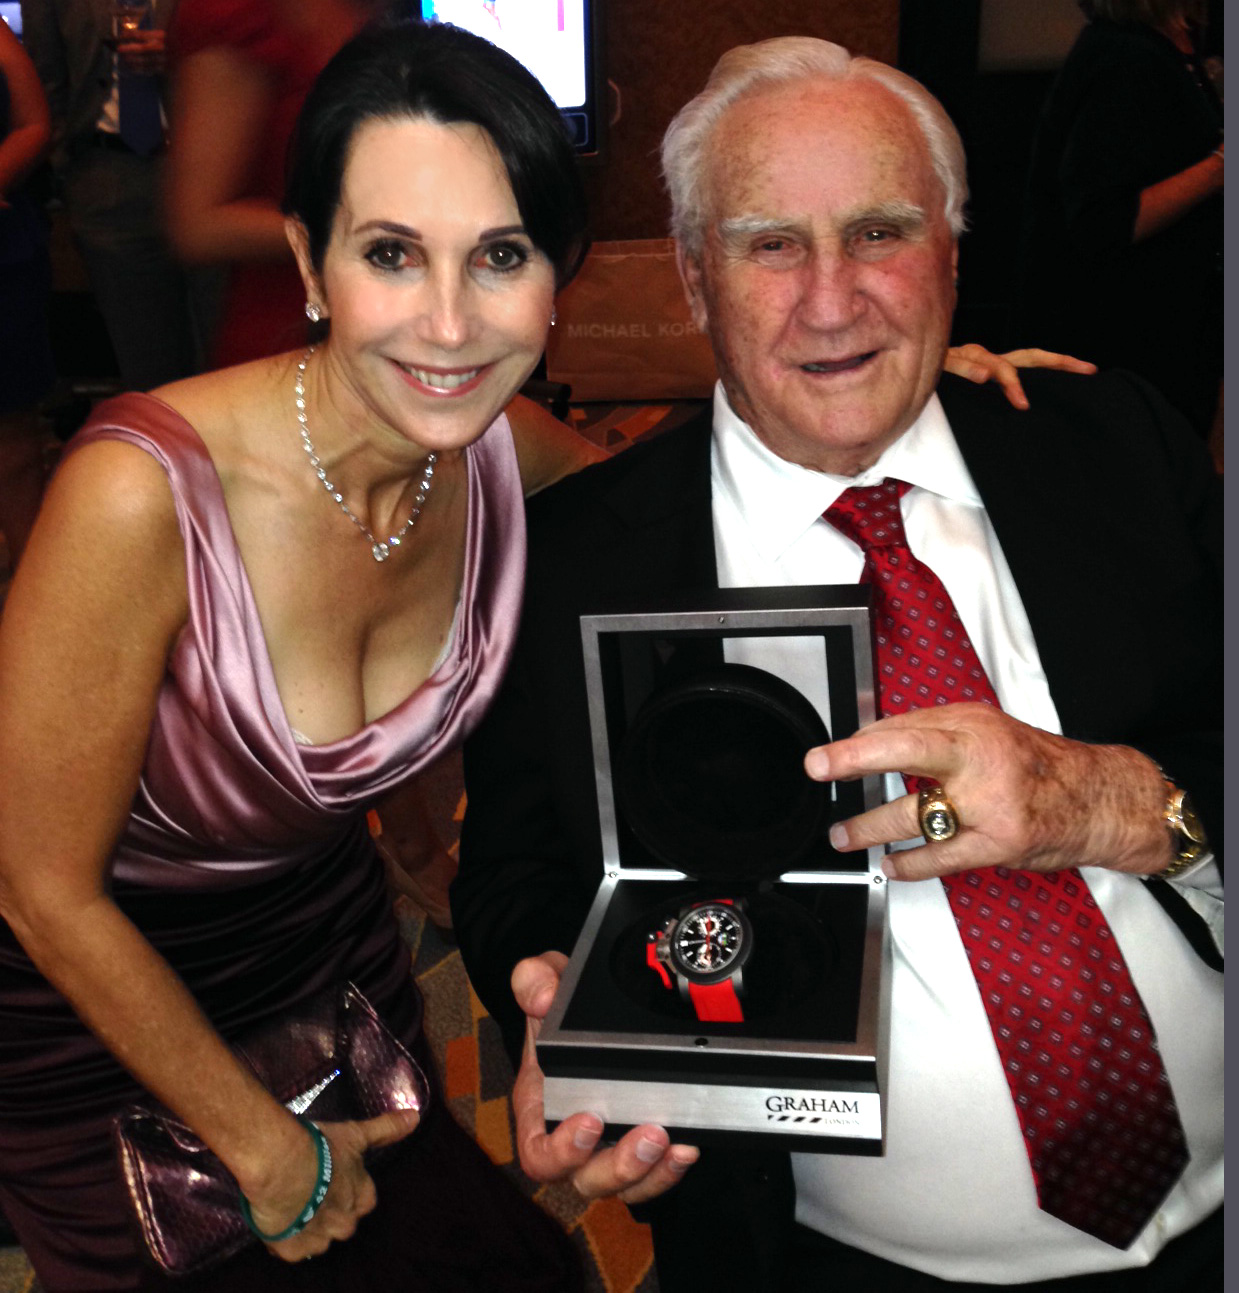 Robin Levinson of Levinson Jewelers with Coach Don Shula presenting GRAHAM donation watch